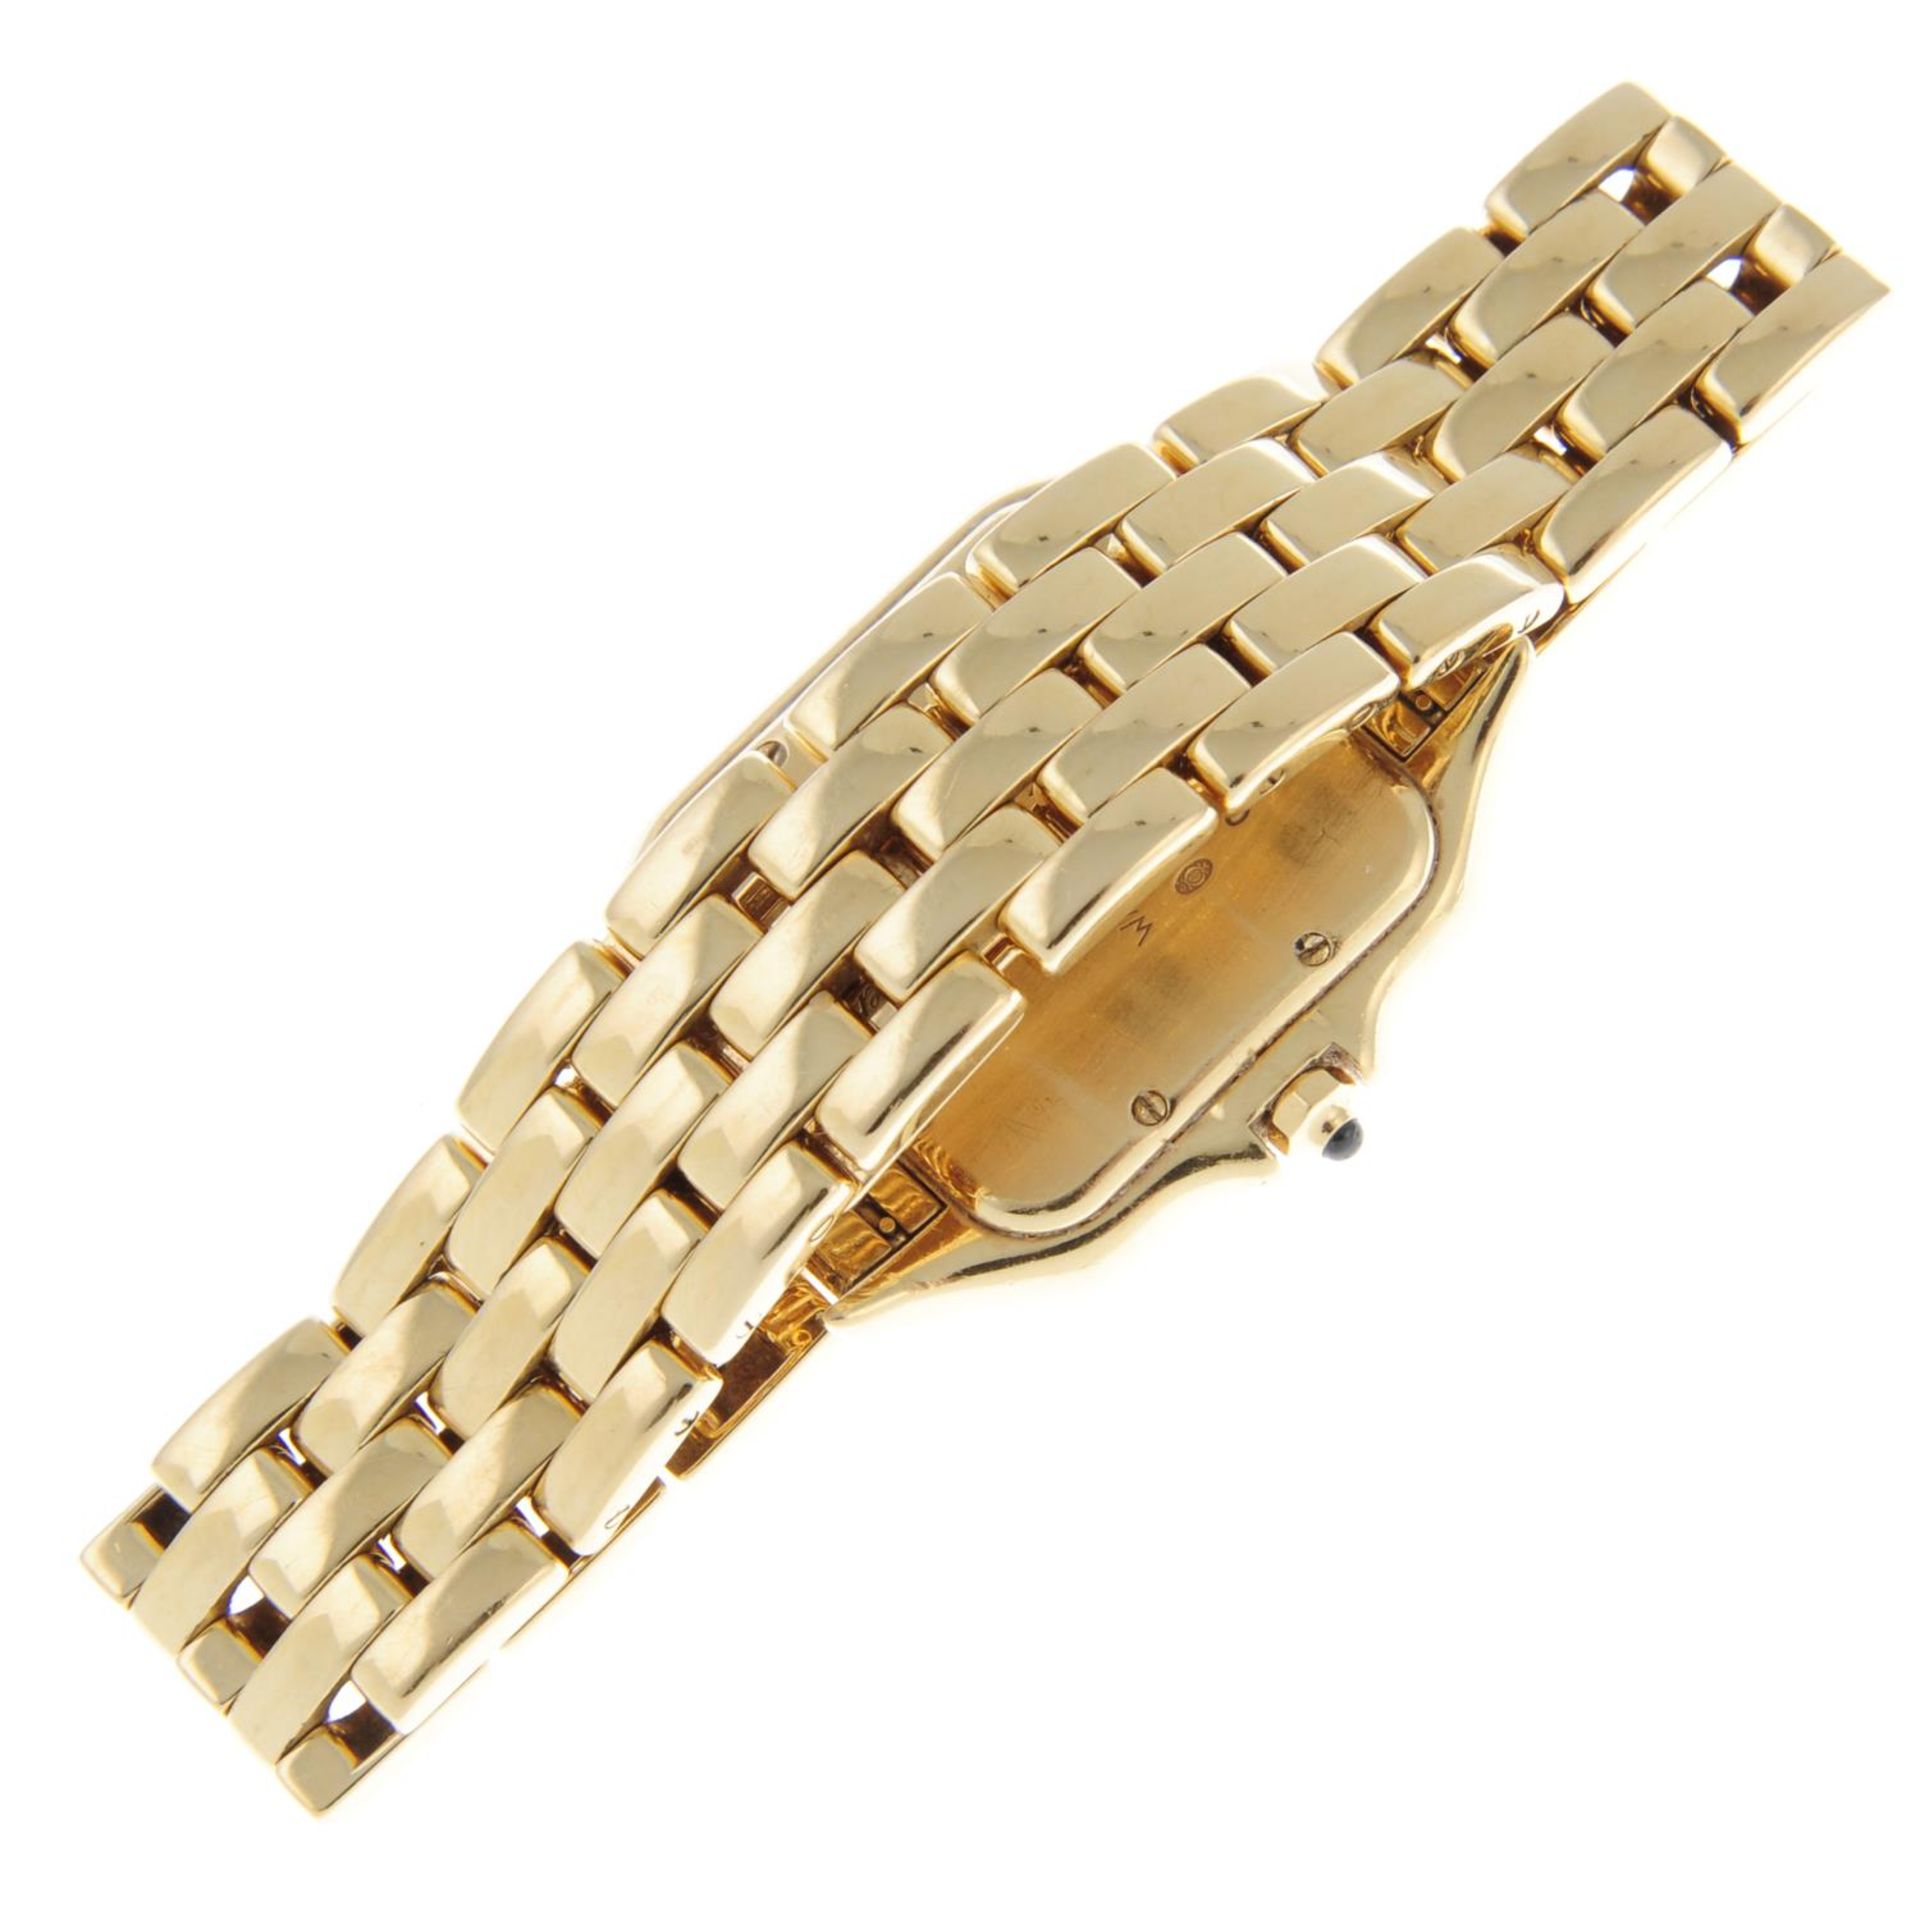 CARTIER - a Pathere bracelet watch. - Image 2 of 5